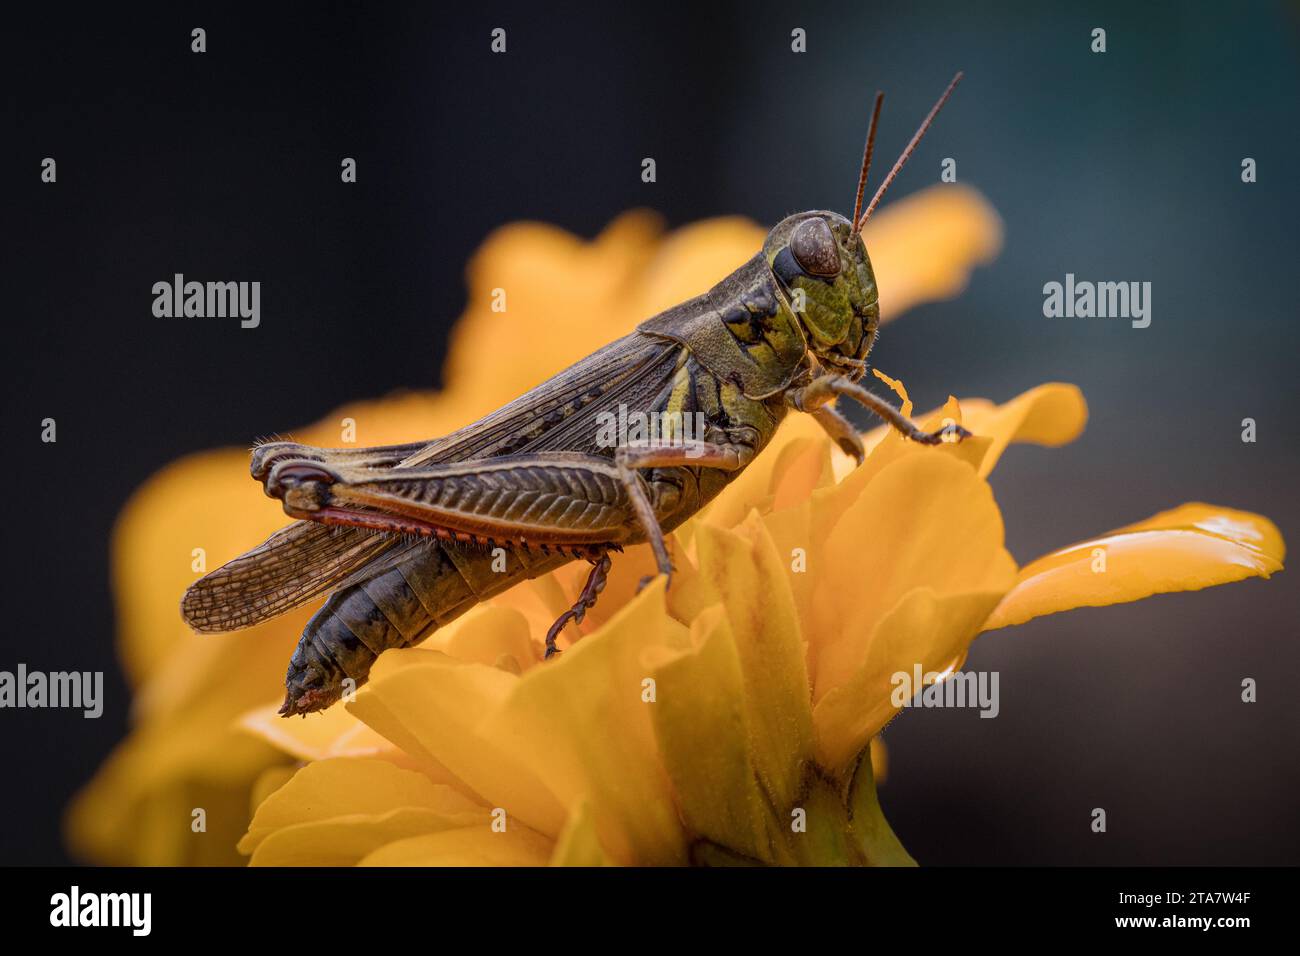 Extreme closeup of Marsh Meadow Grasshopper standing on yellow flower Stock Photo